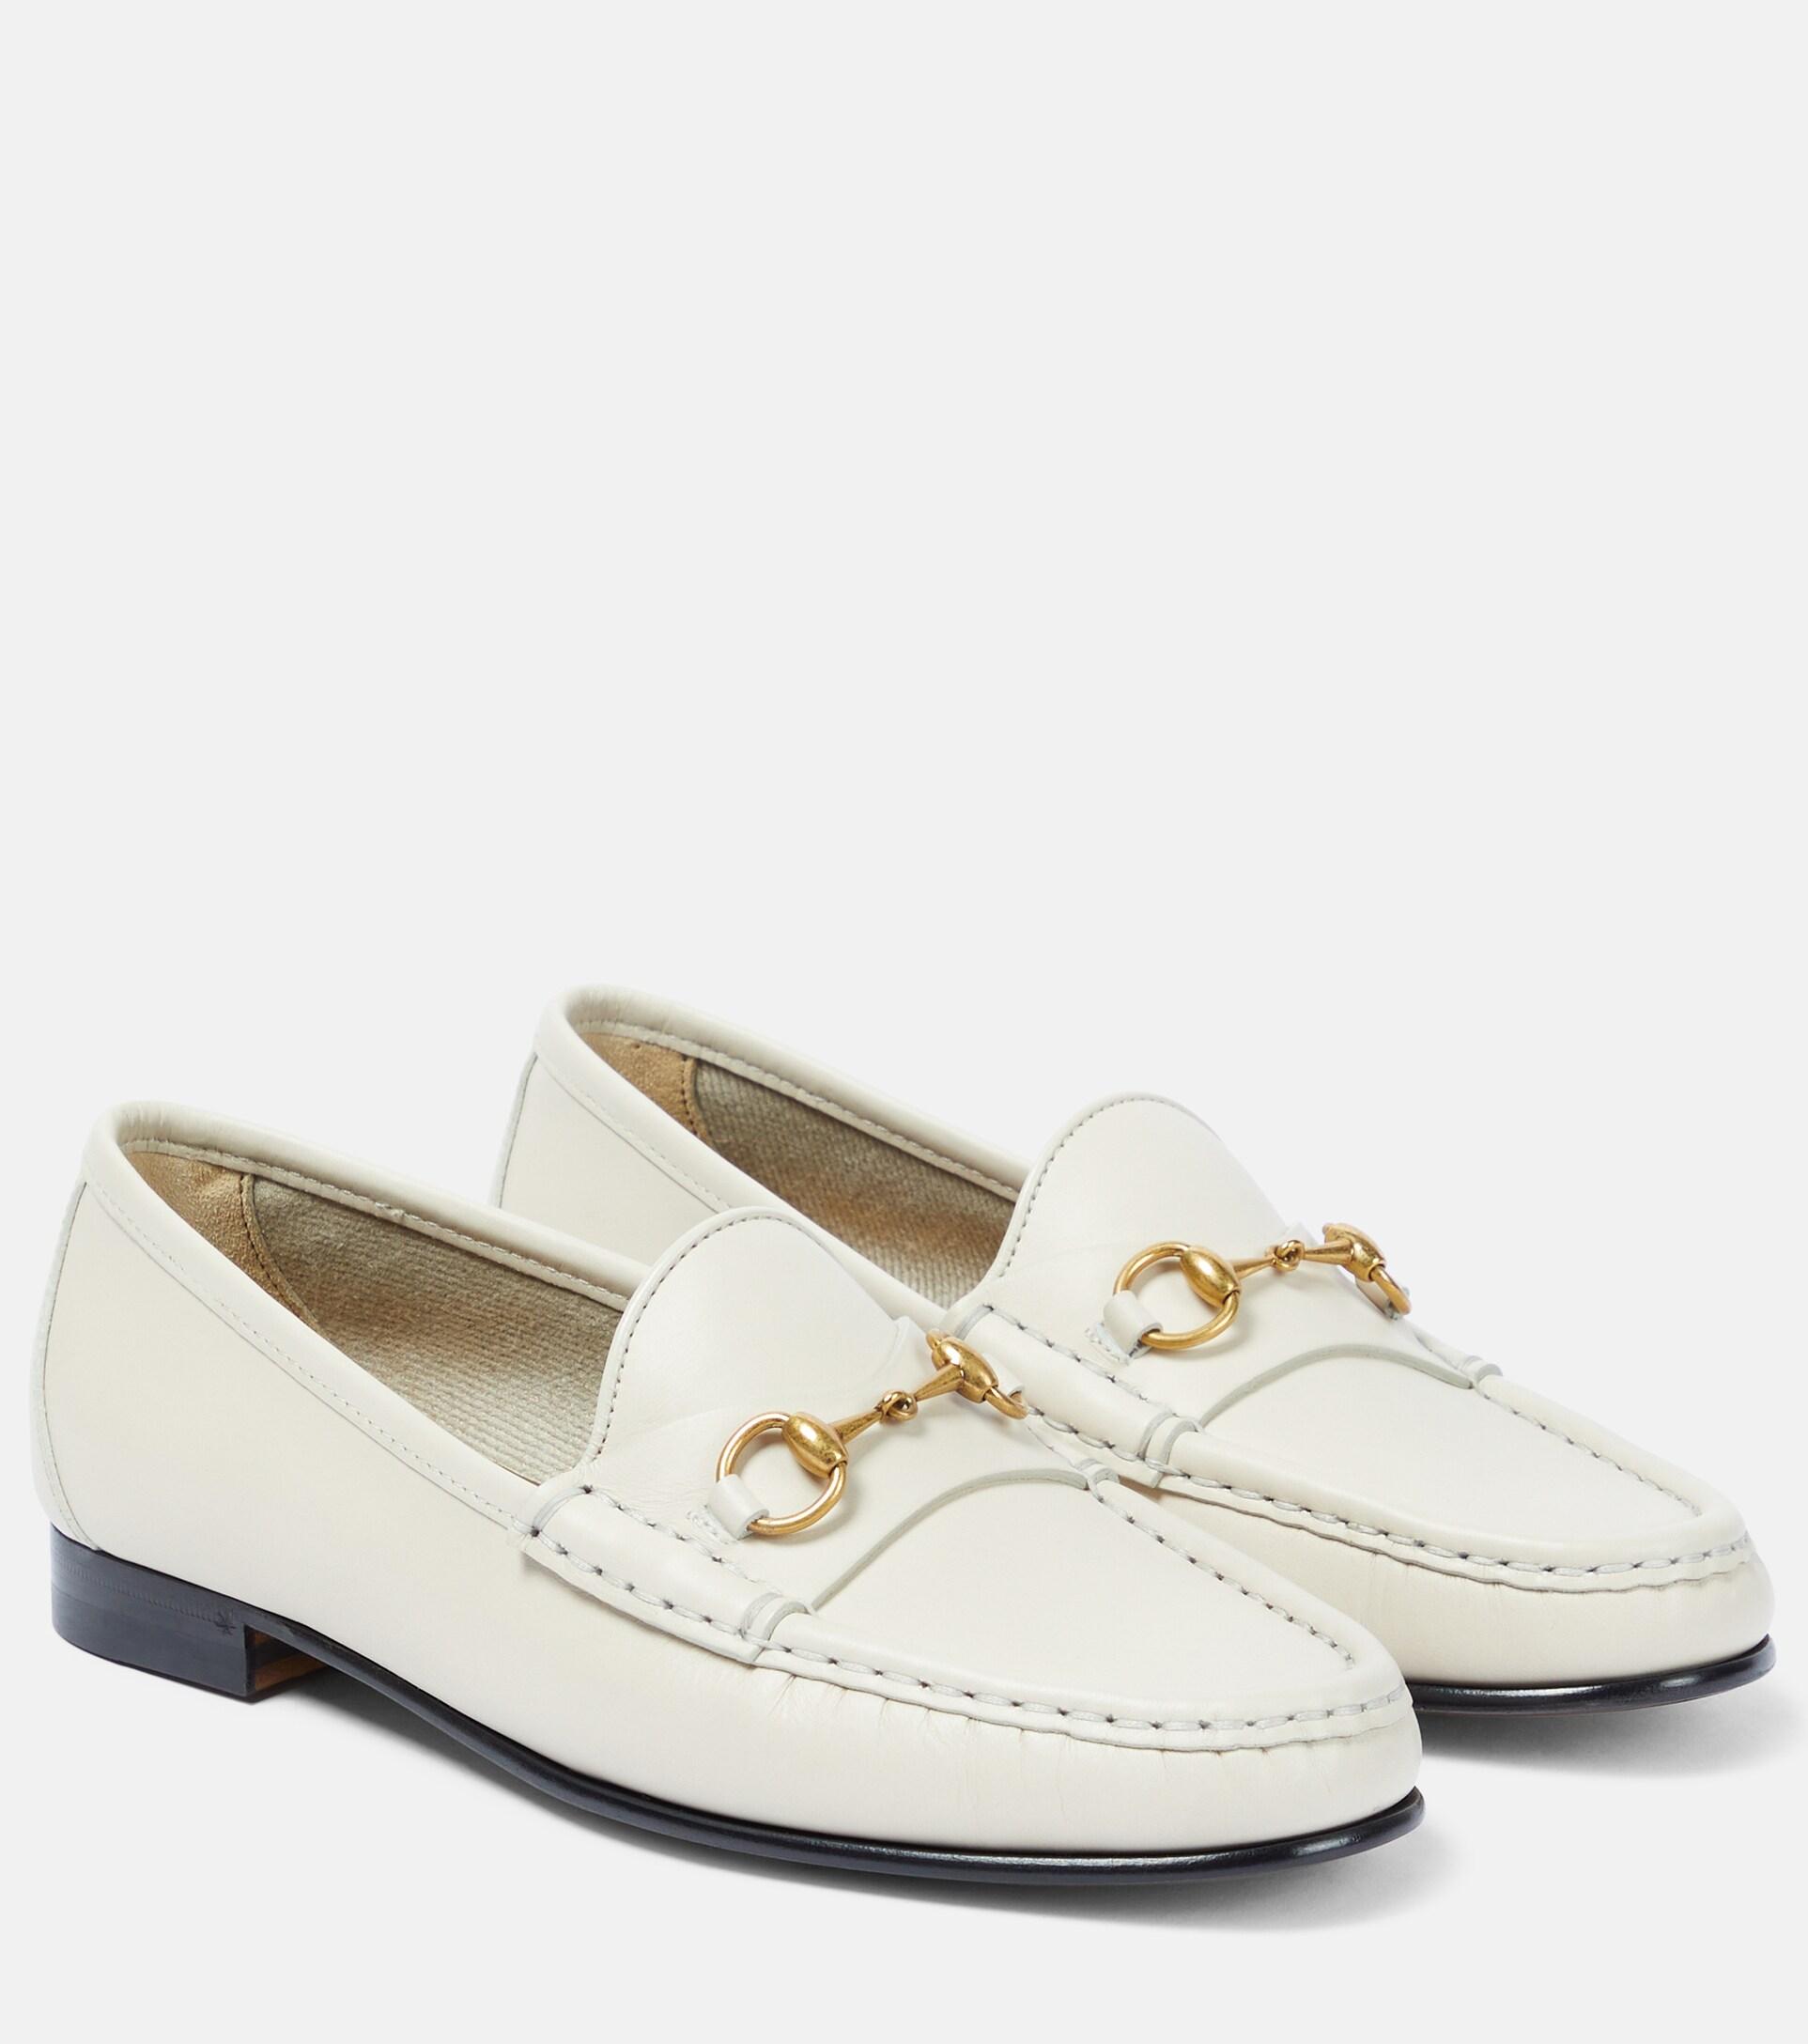 Gucci 1953 Horsebit Leather Loafers in White | Lyst